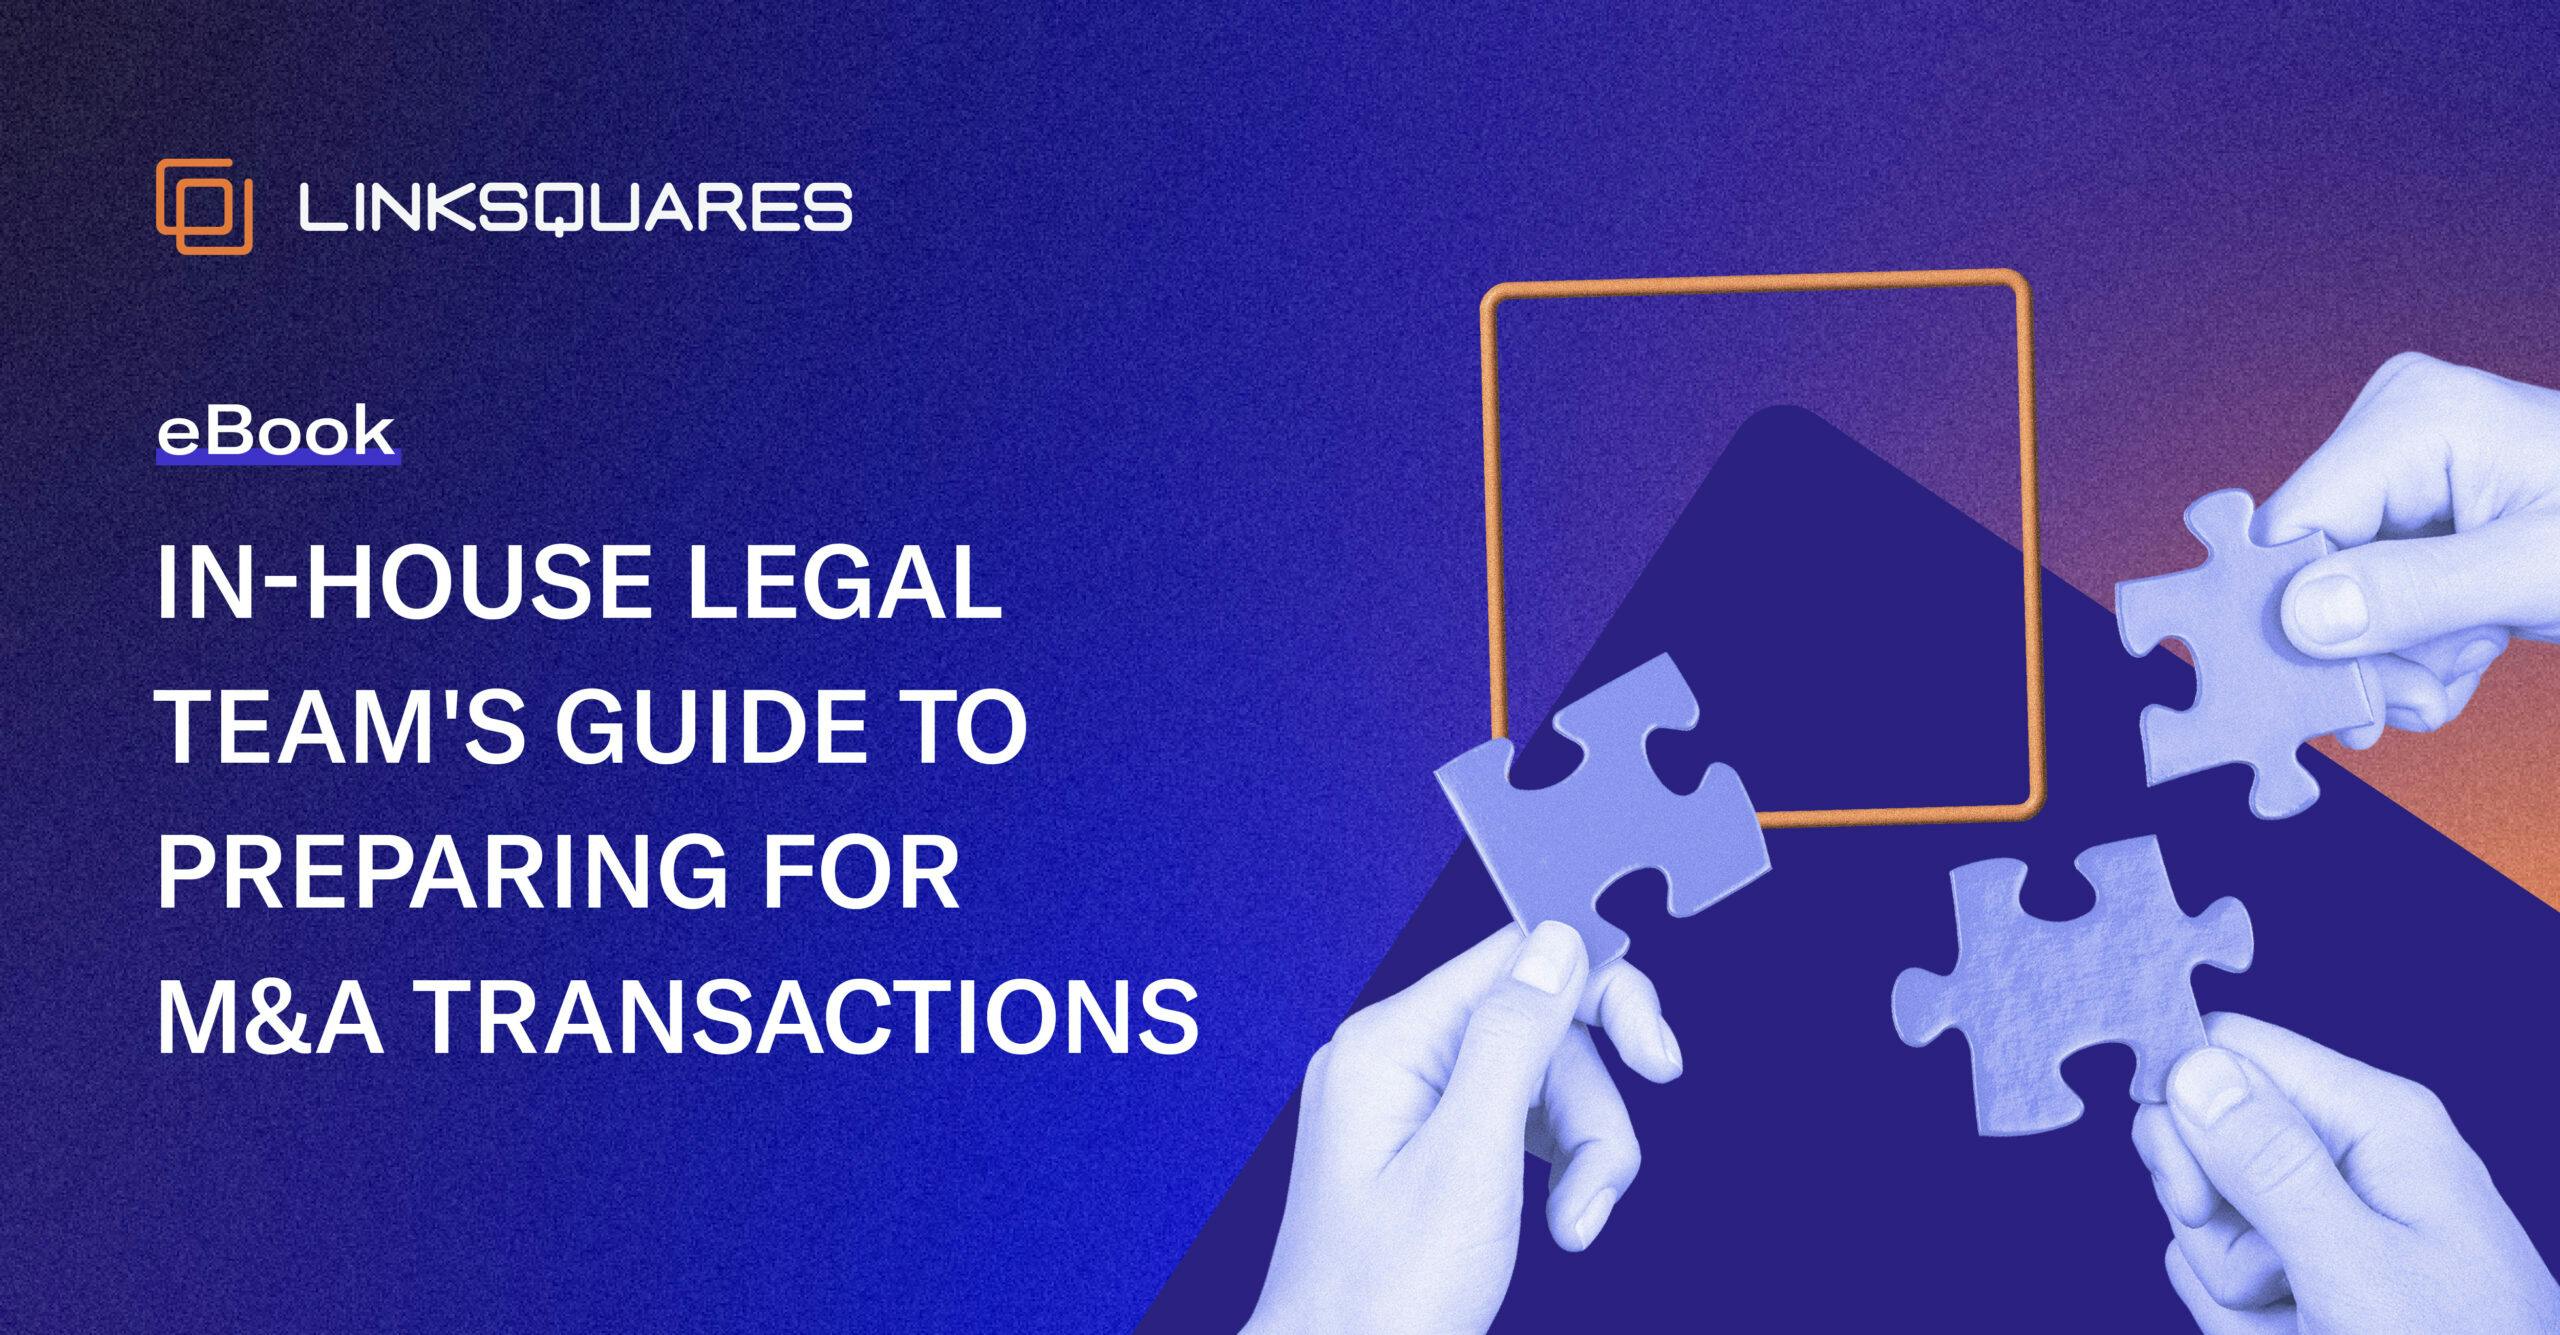 eBook: In-House Legal Team's Guide to Preparing for M&A Transactions Listing Page